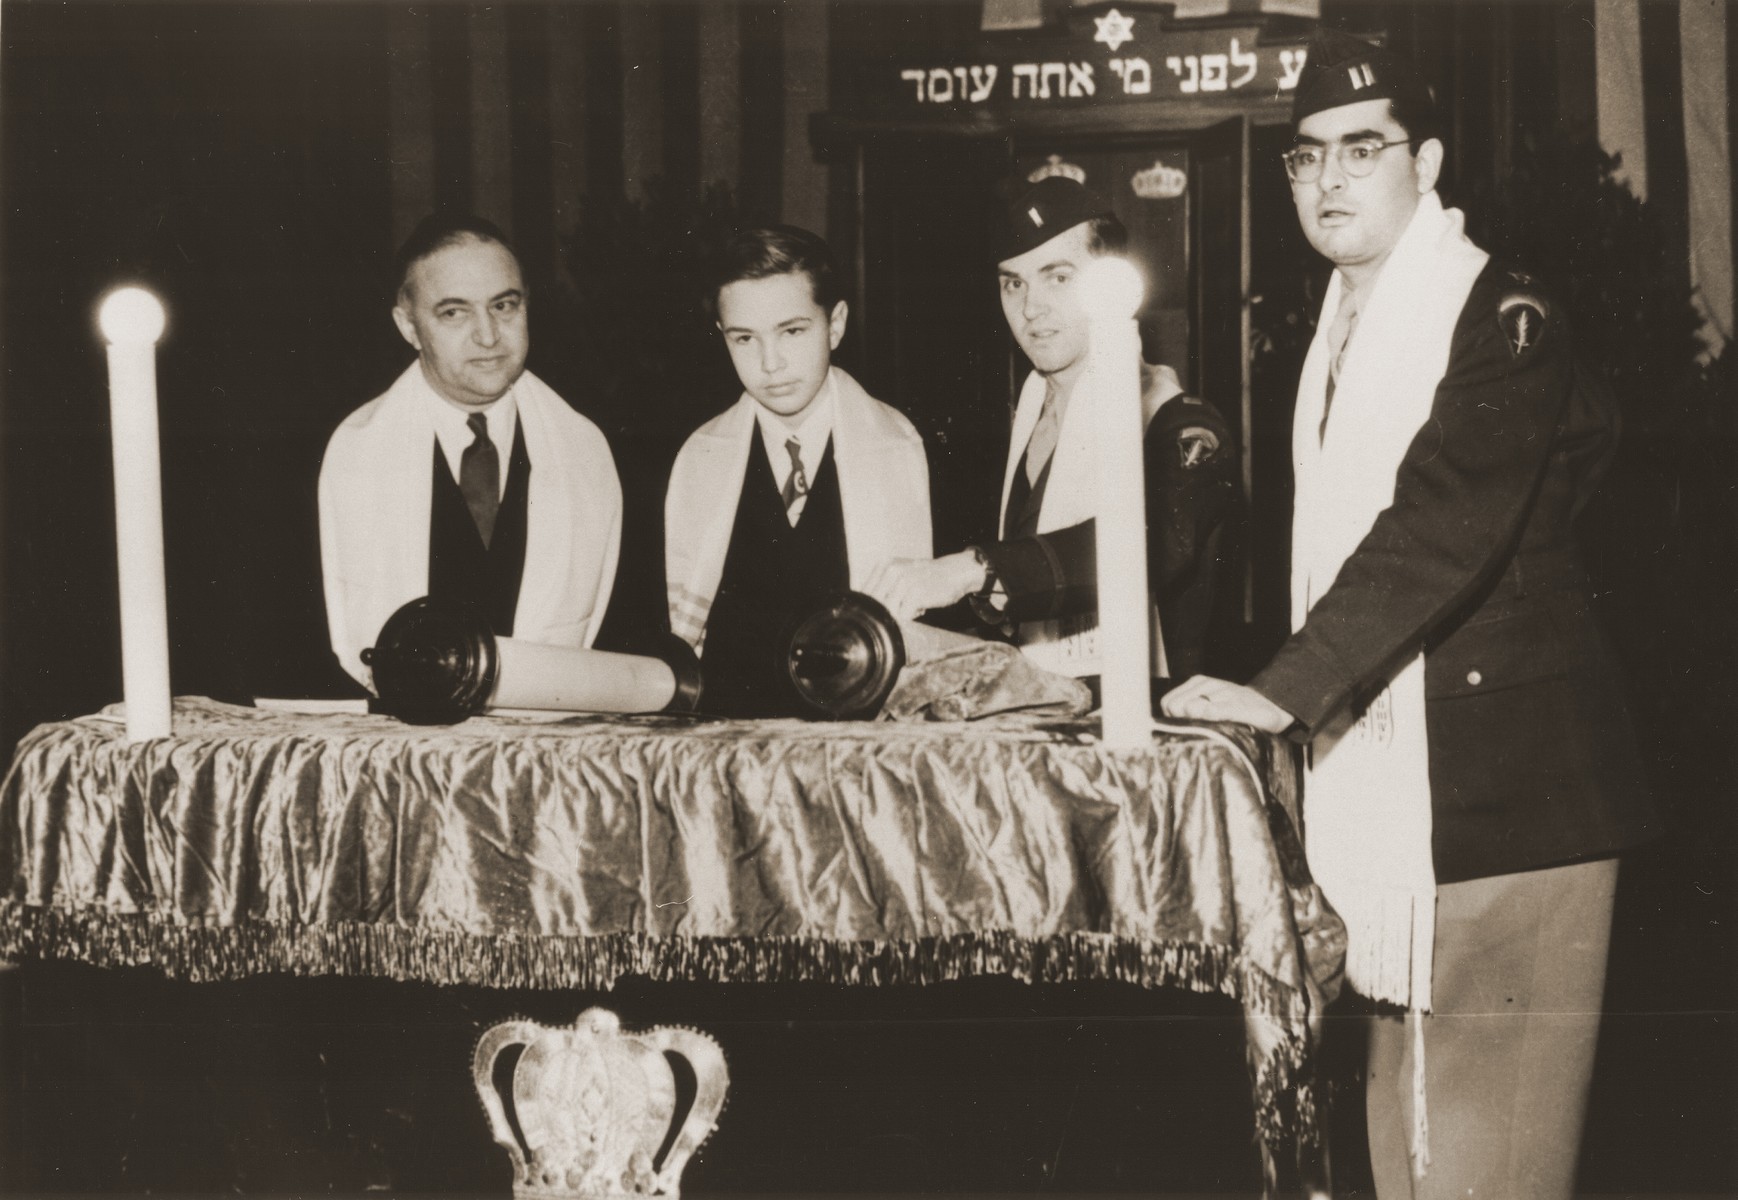 Stephen Bernstein, son of American chaplain Philip Bernstein, reads from the torah at his bar mitzvah at the Philanthropin School in Frankfurt, Germany.

Pictured from left to right are Rabbi Philip Bernstein, Stephen Bernstein, Rabbi Mayer Abramowitz, and Rabbi Herbert Friedman.